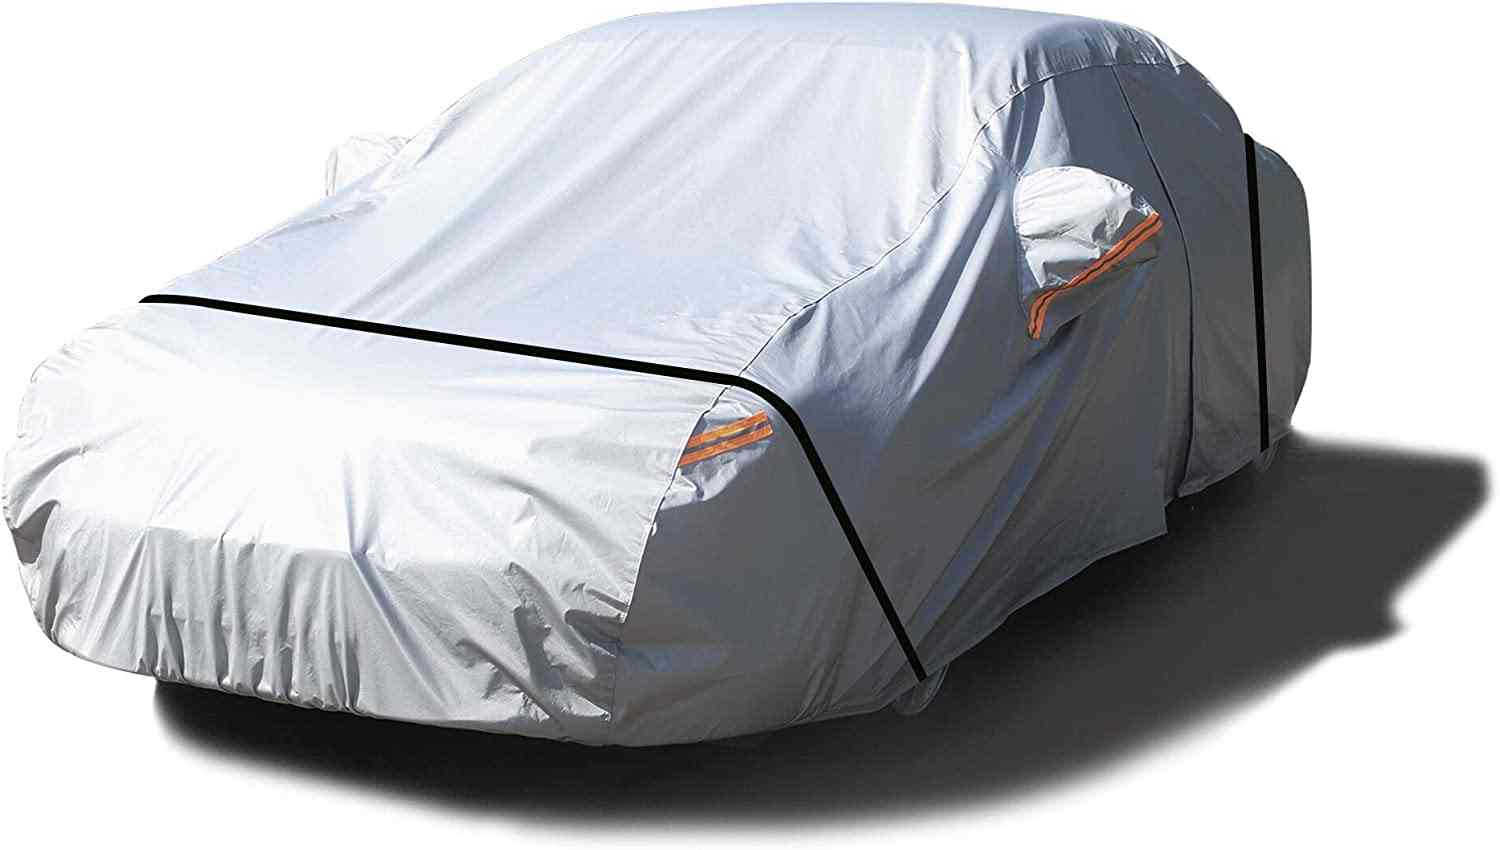 AndyKuang Car Cover For UV Protection